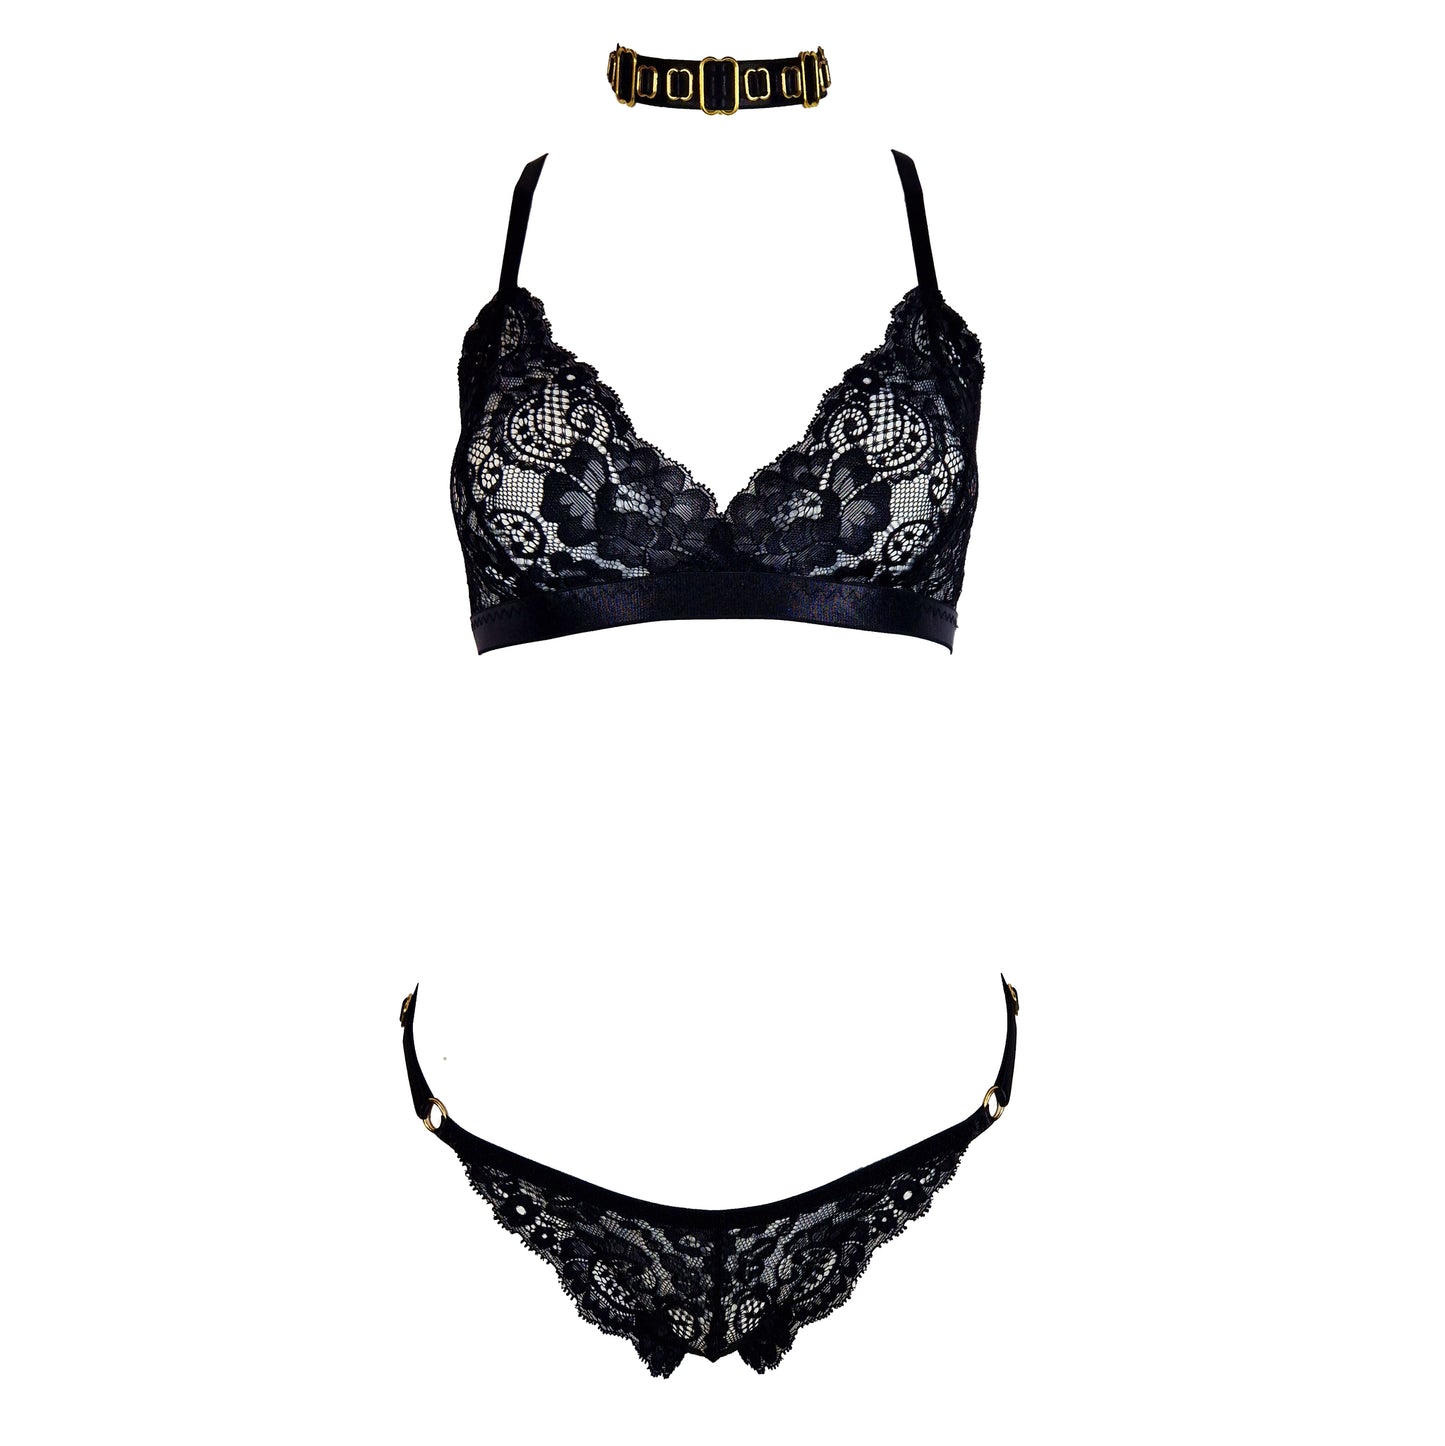 Golden Flame I lace lingerie set with crotchless panties black